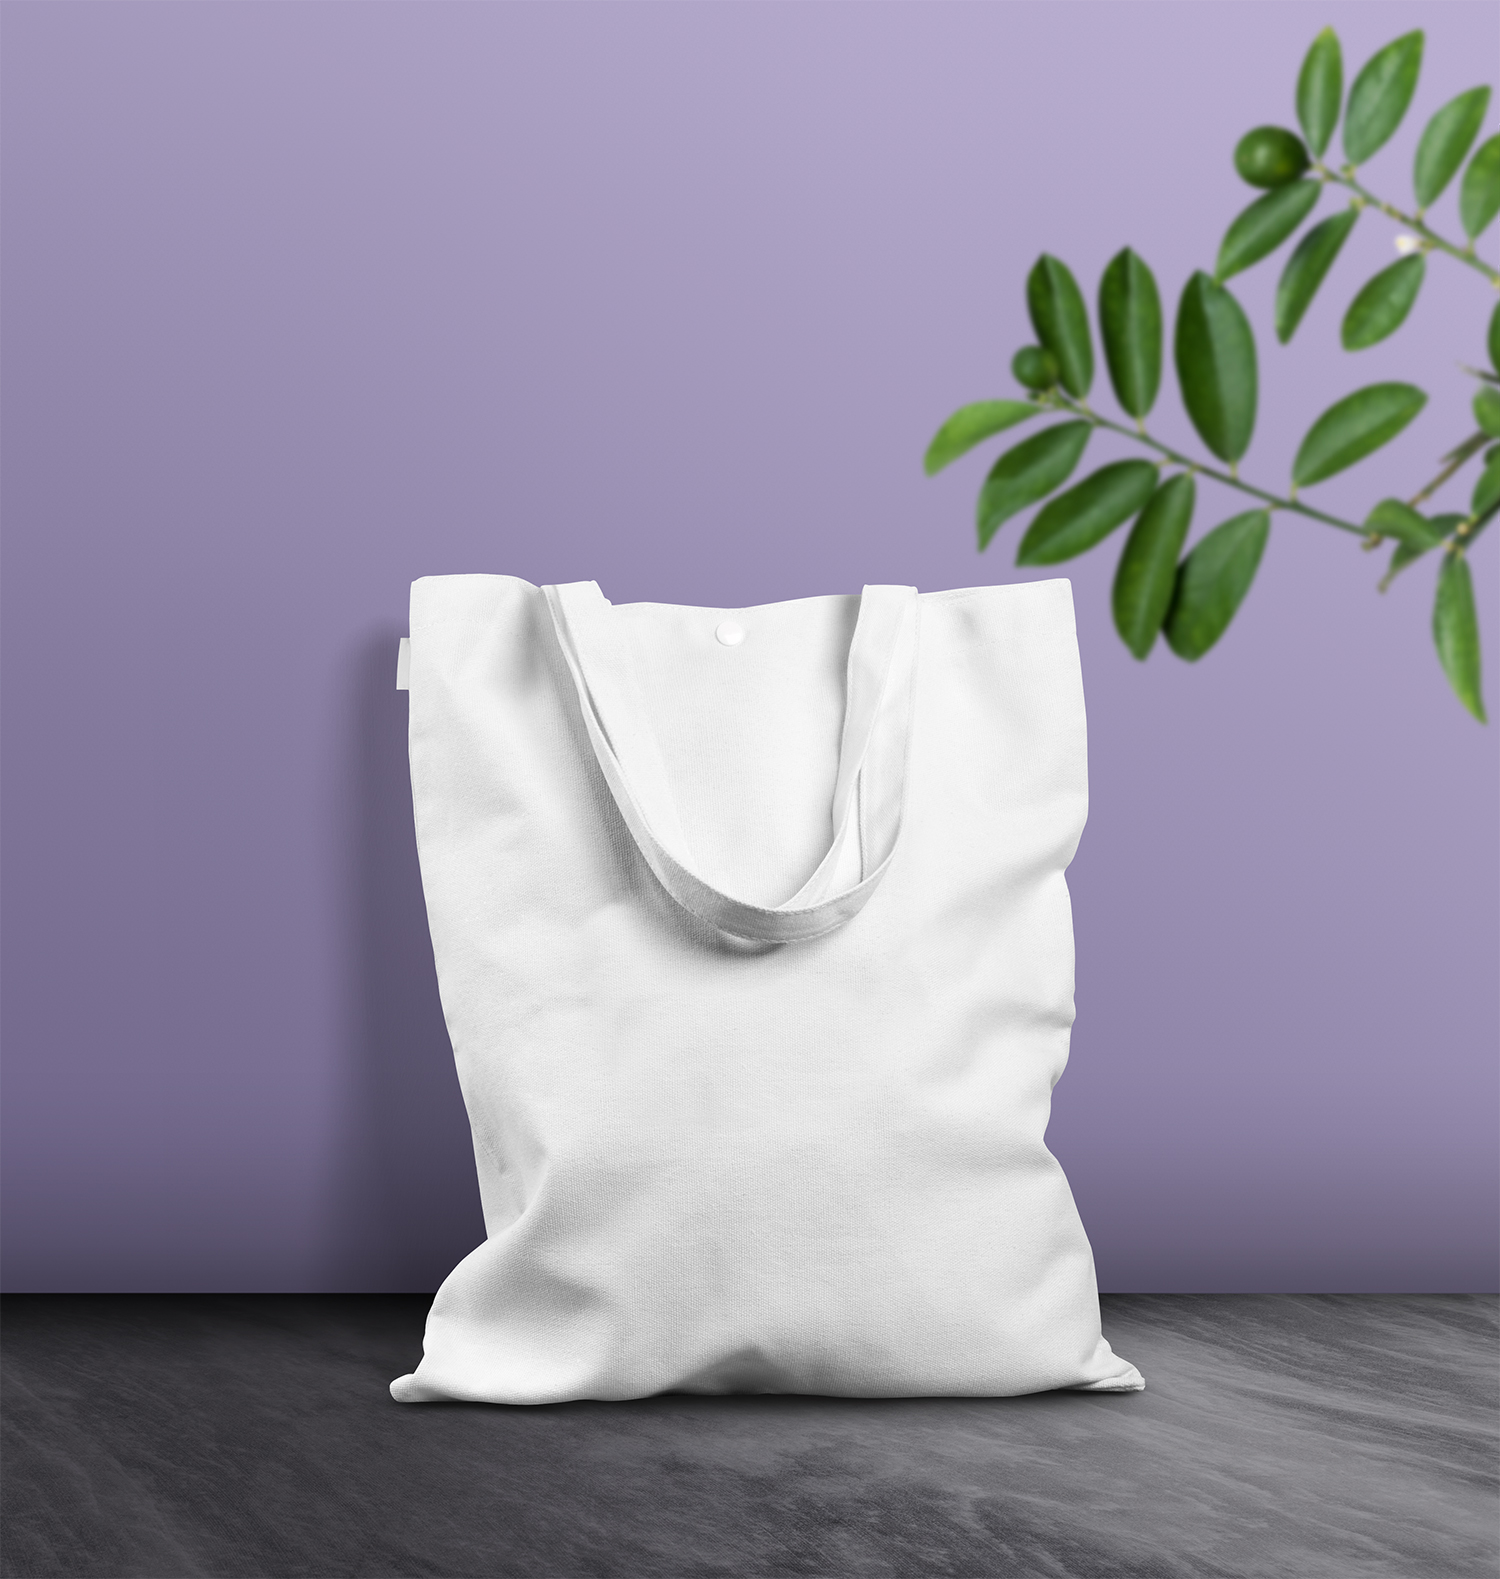 Download View Canvas Bag Mockup Free Download Background ...